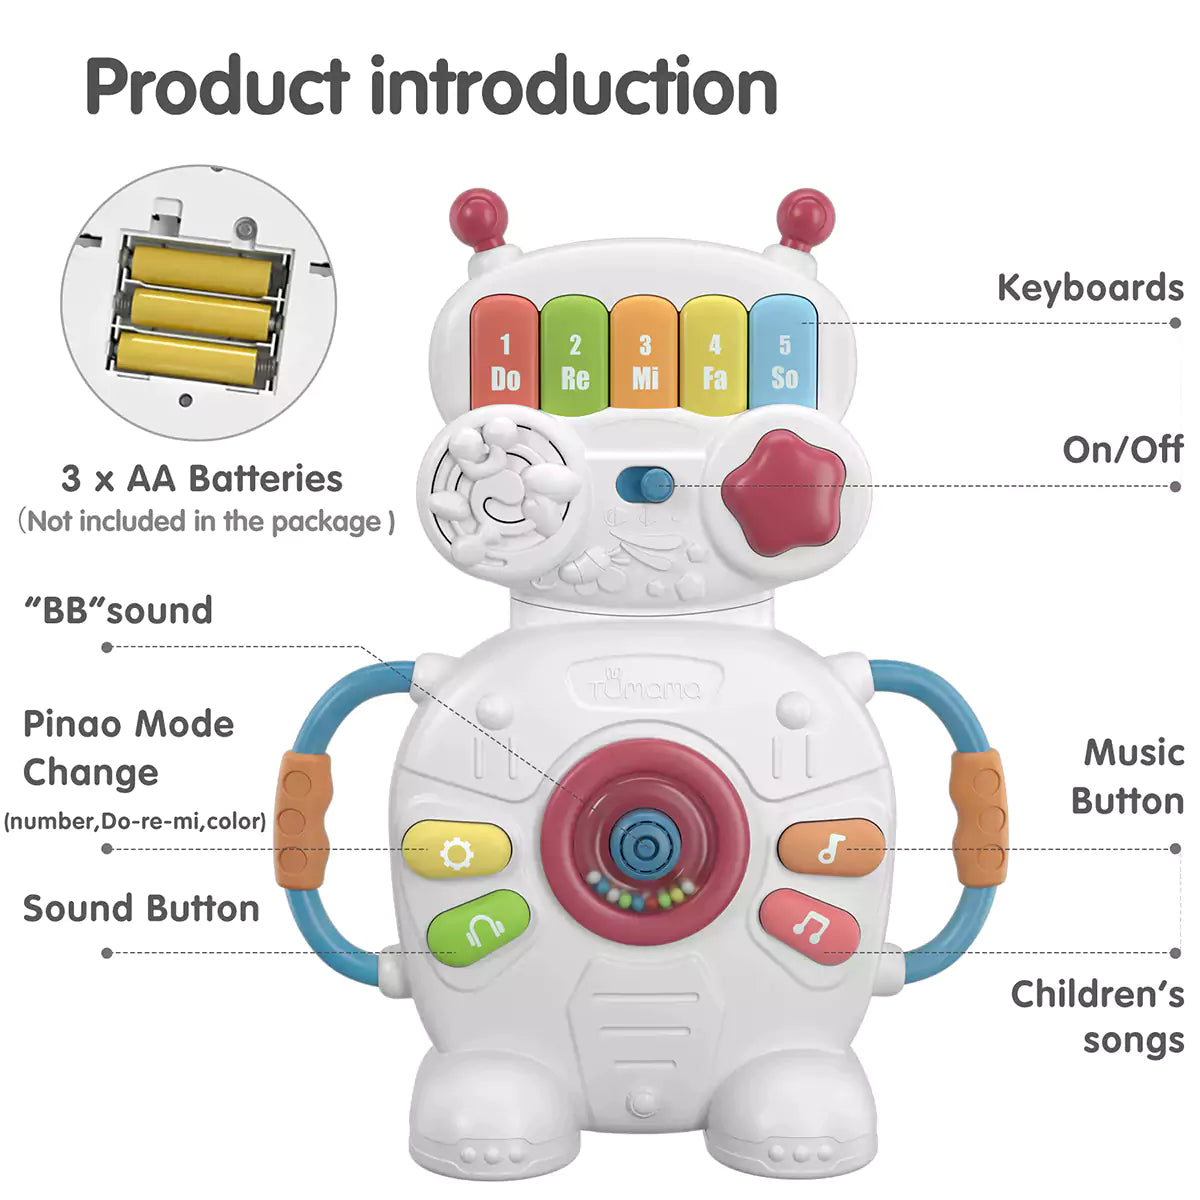 Toddlers' robot toy with numbers, colors, and songs